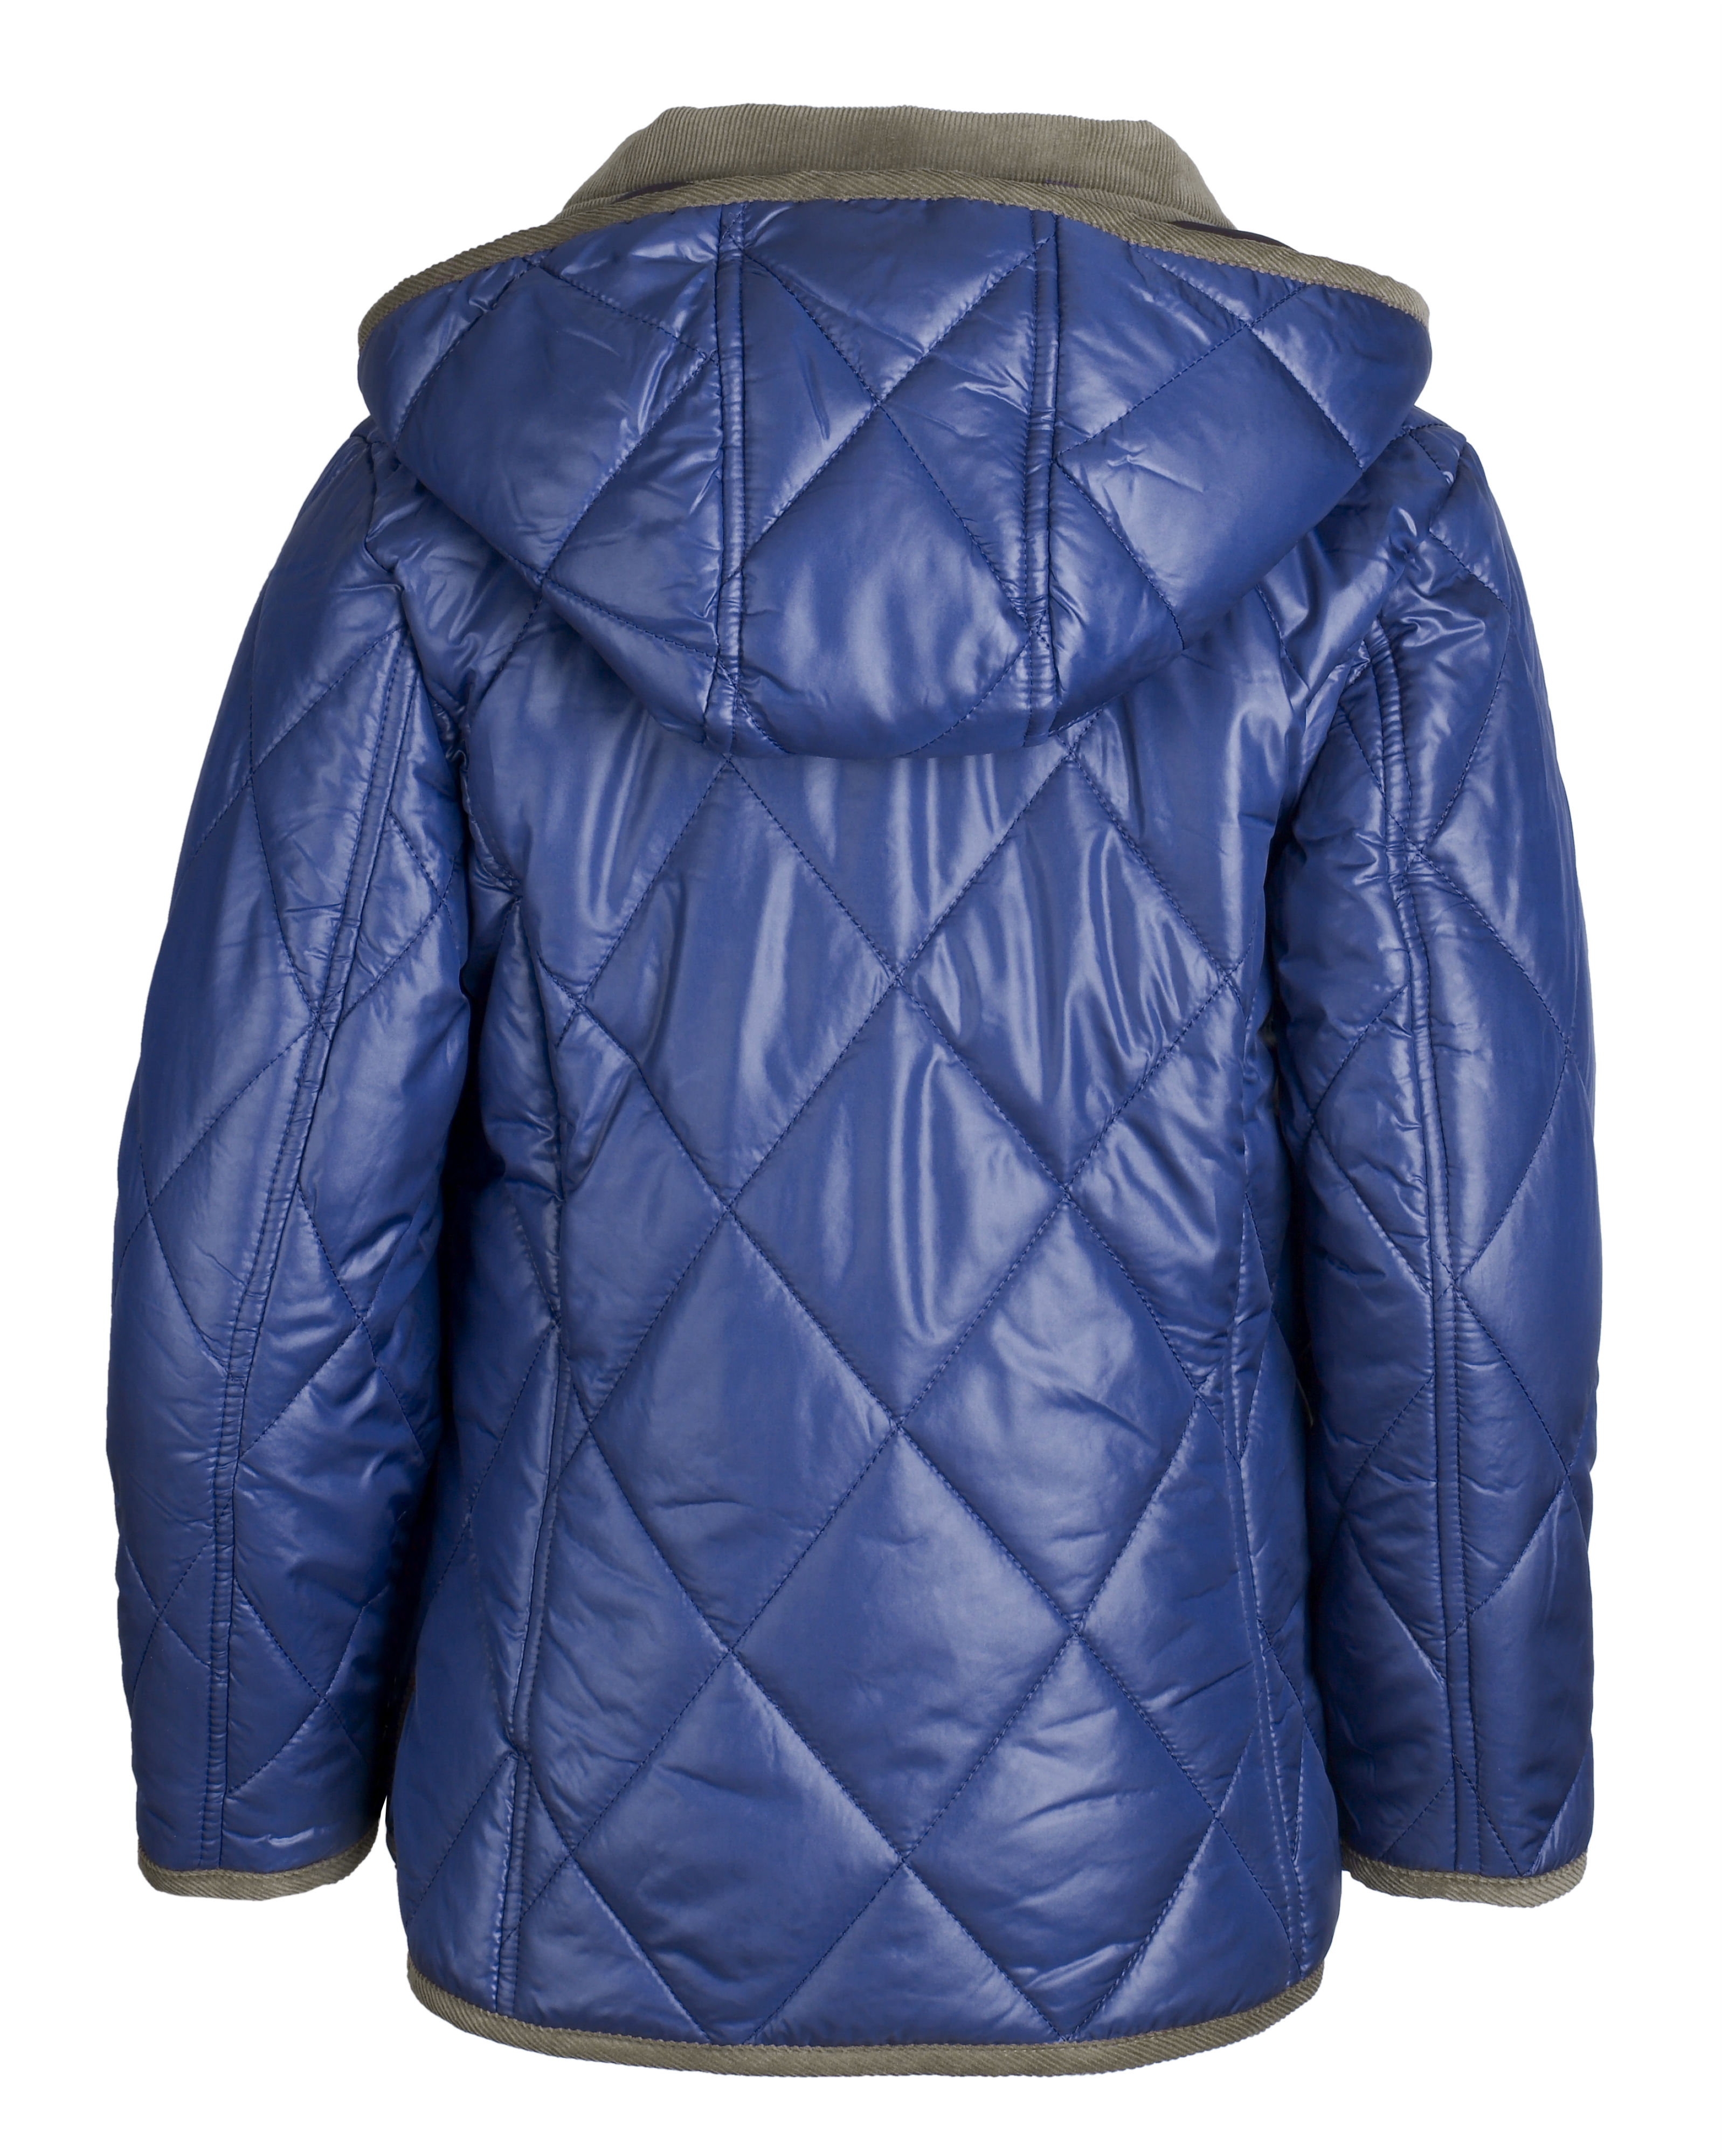 Arctic Circle Girls Padded Quilted Fall Winter Rain Trench Coat Jacket with Hood - image 3 of 4